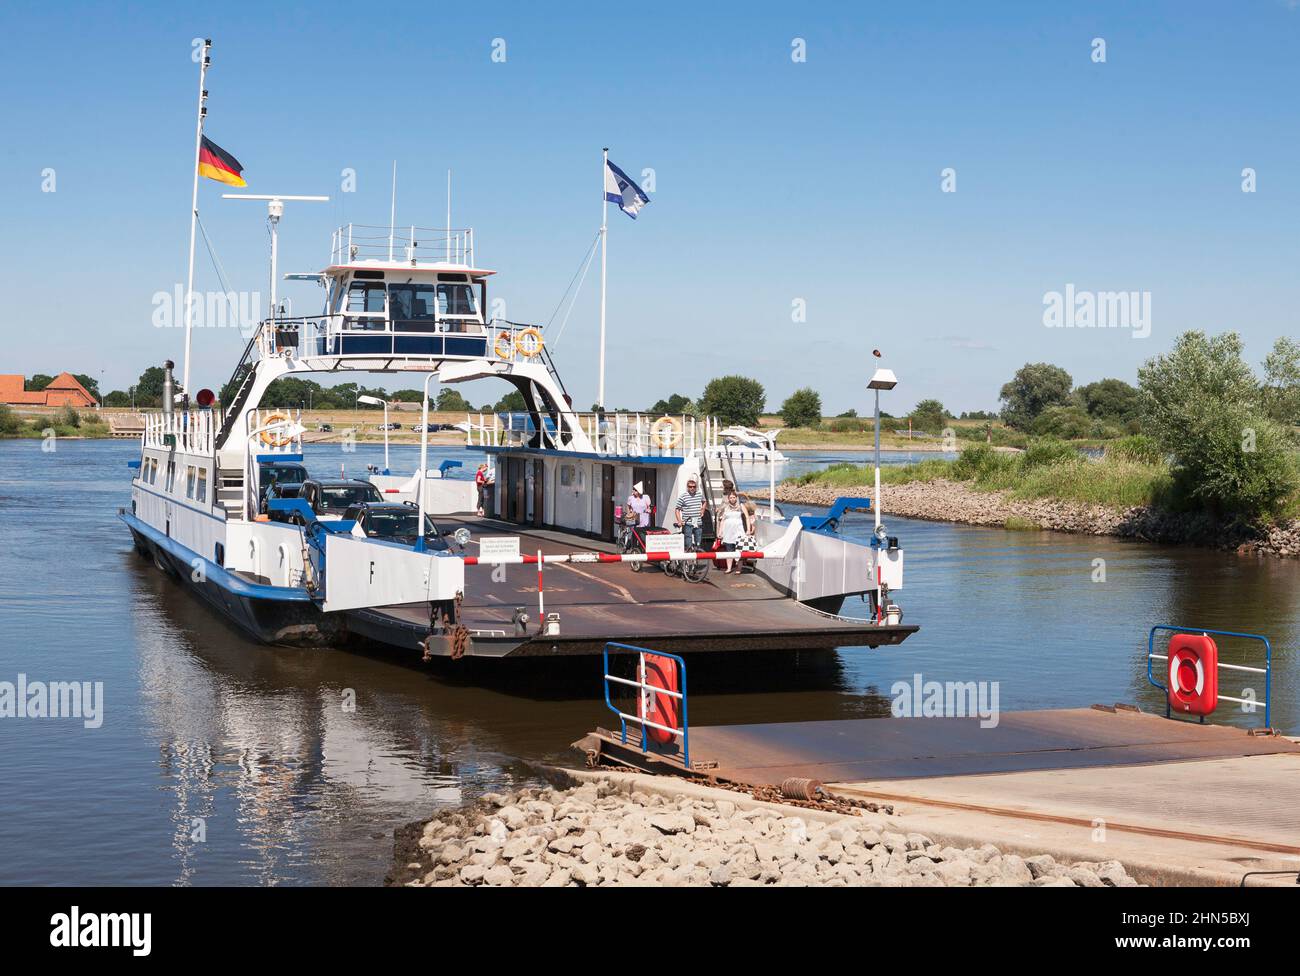 The Darchau to Neu Darchau car ferry 'Tanja' over the river Elbe in Lower Saxony, Germany, Europe Stock Photo